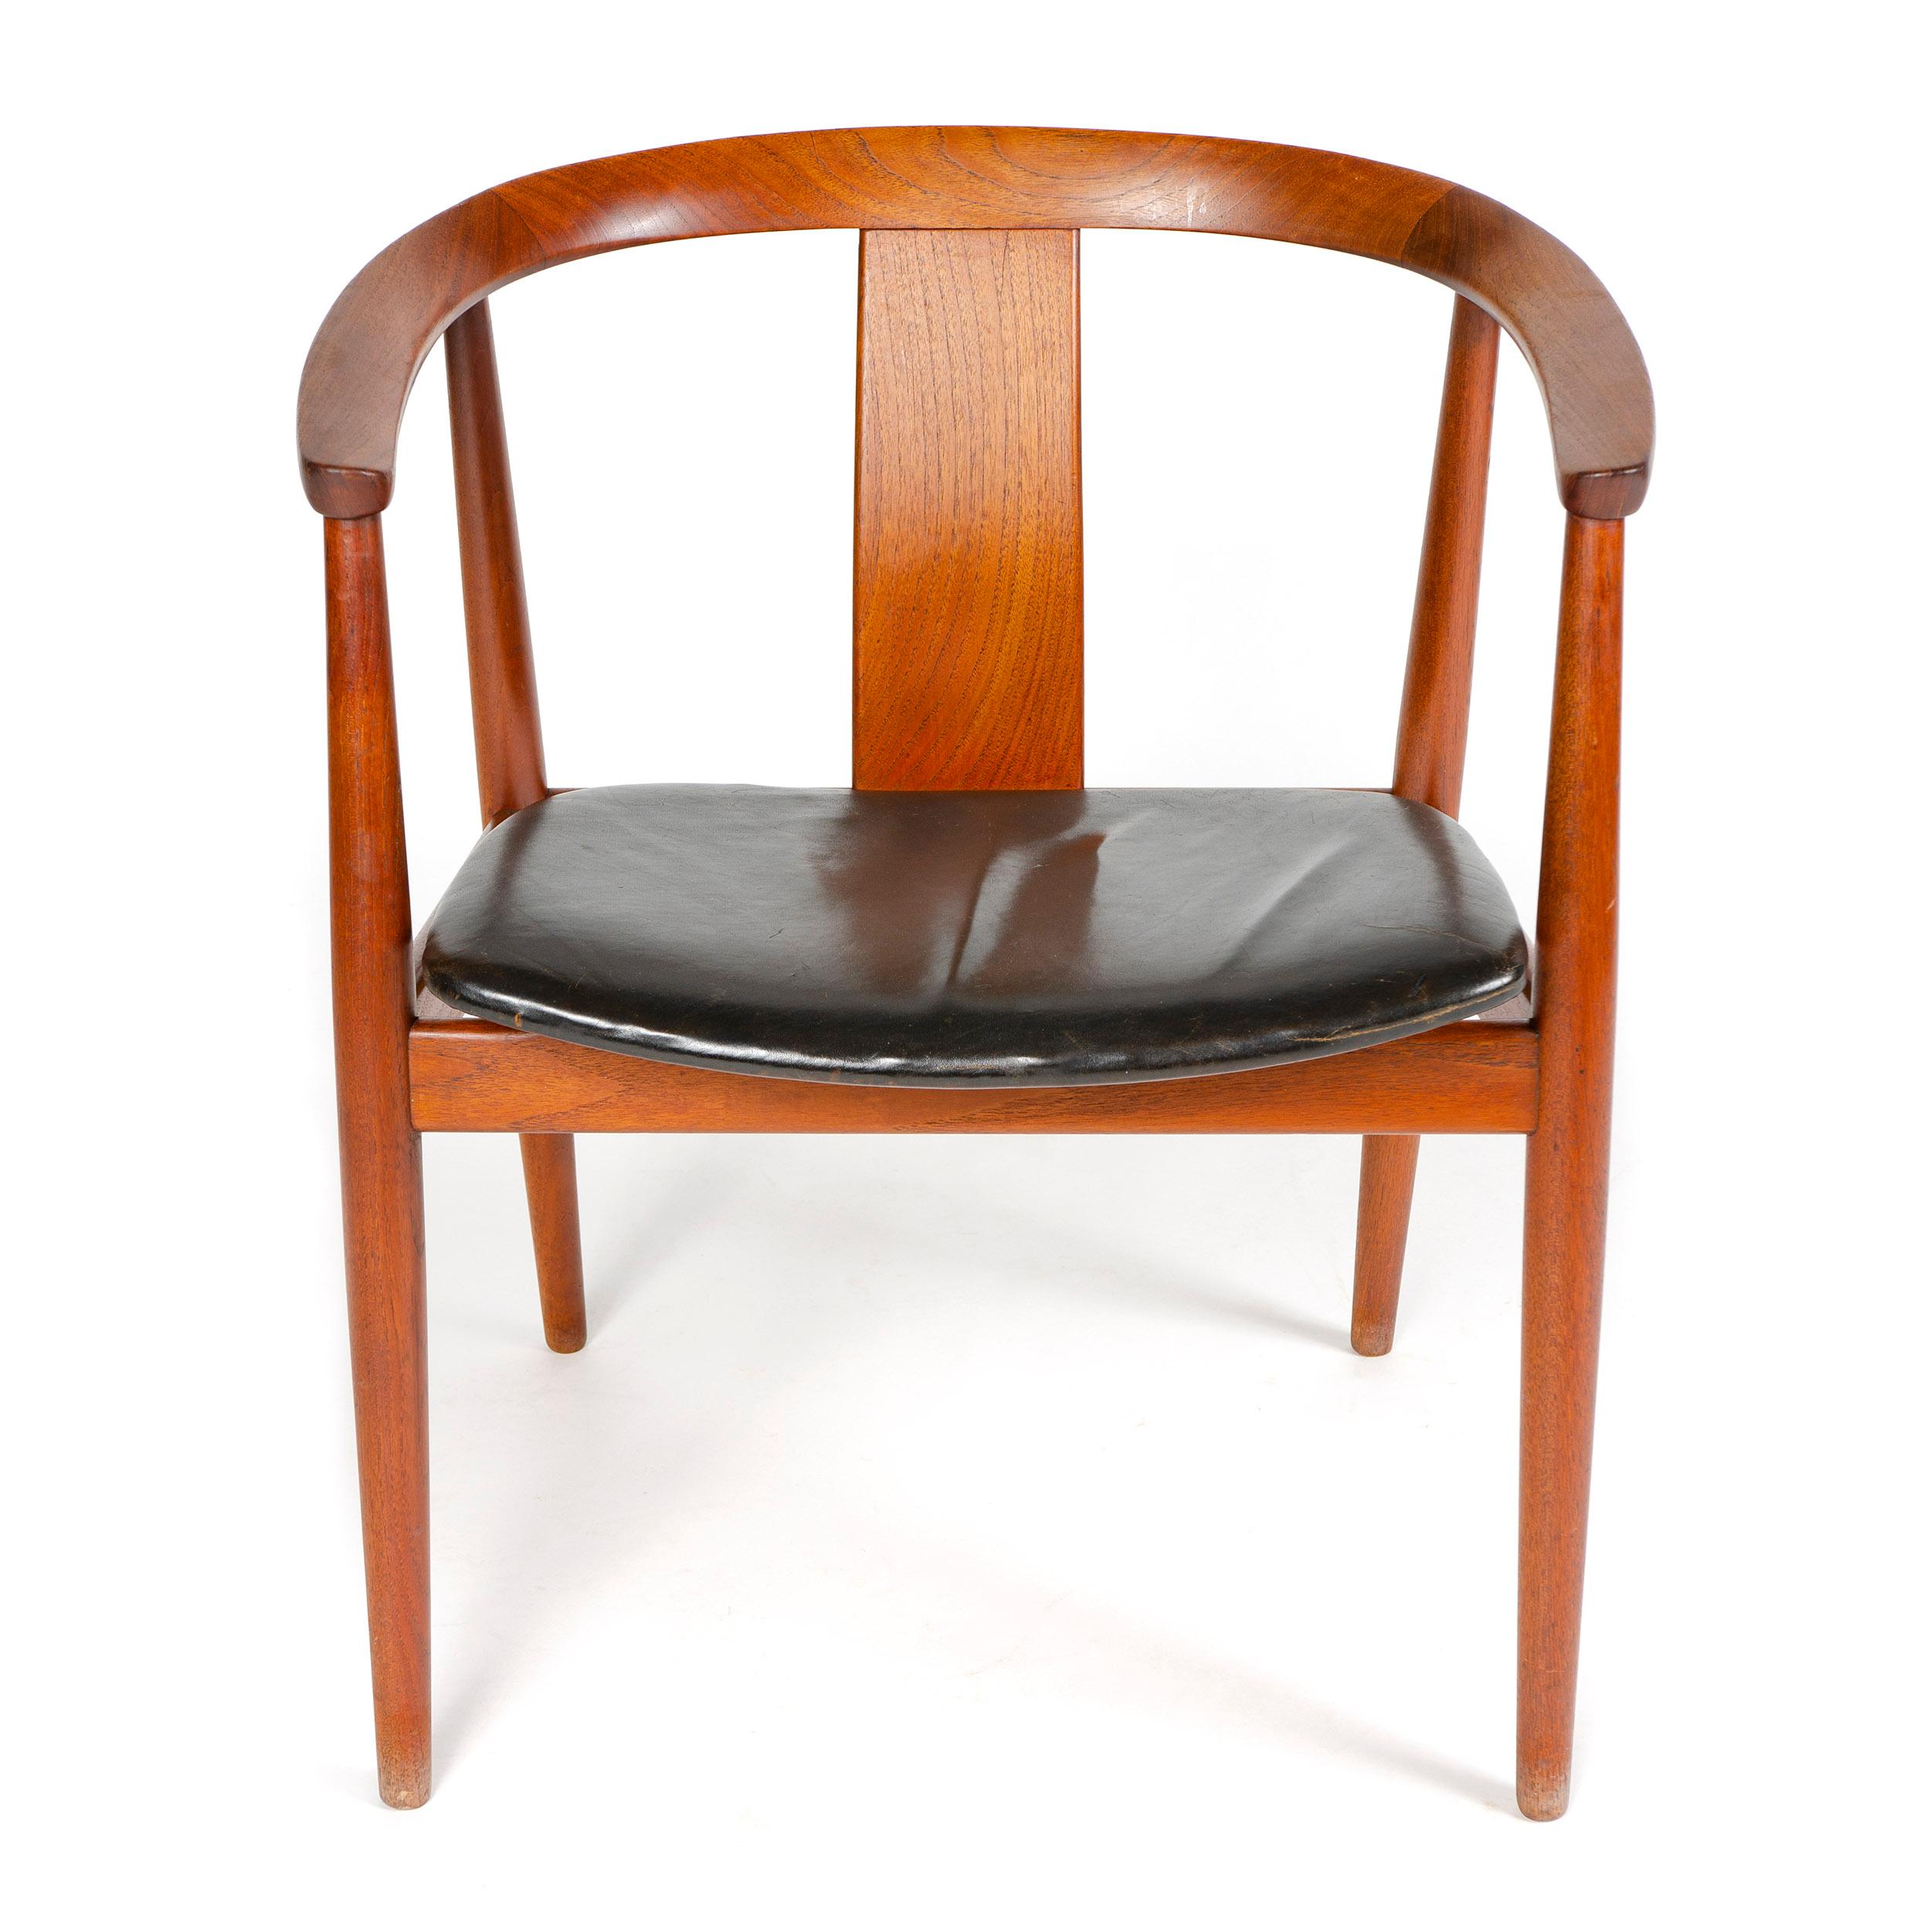 A Mid-Century Modern teak side chair / dining chair designed by by Tove & Edvard Kindt-Larsen. The design features a broad splat in the centre of the chair back and a leather upholstered seat. The chair bears the label 'Illums Bolighus' underneath.